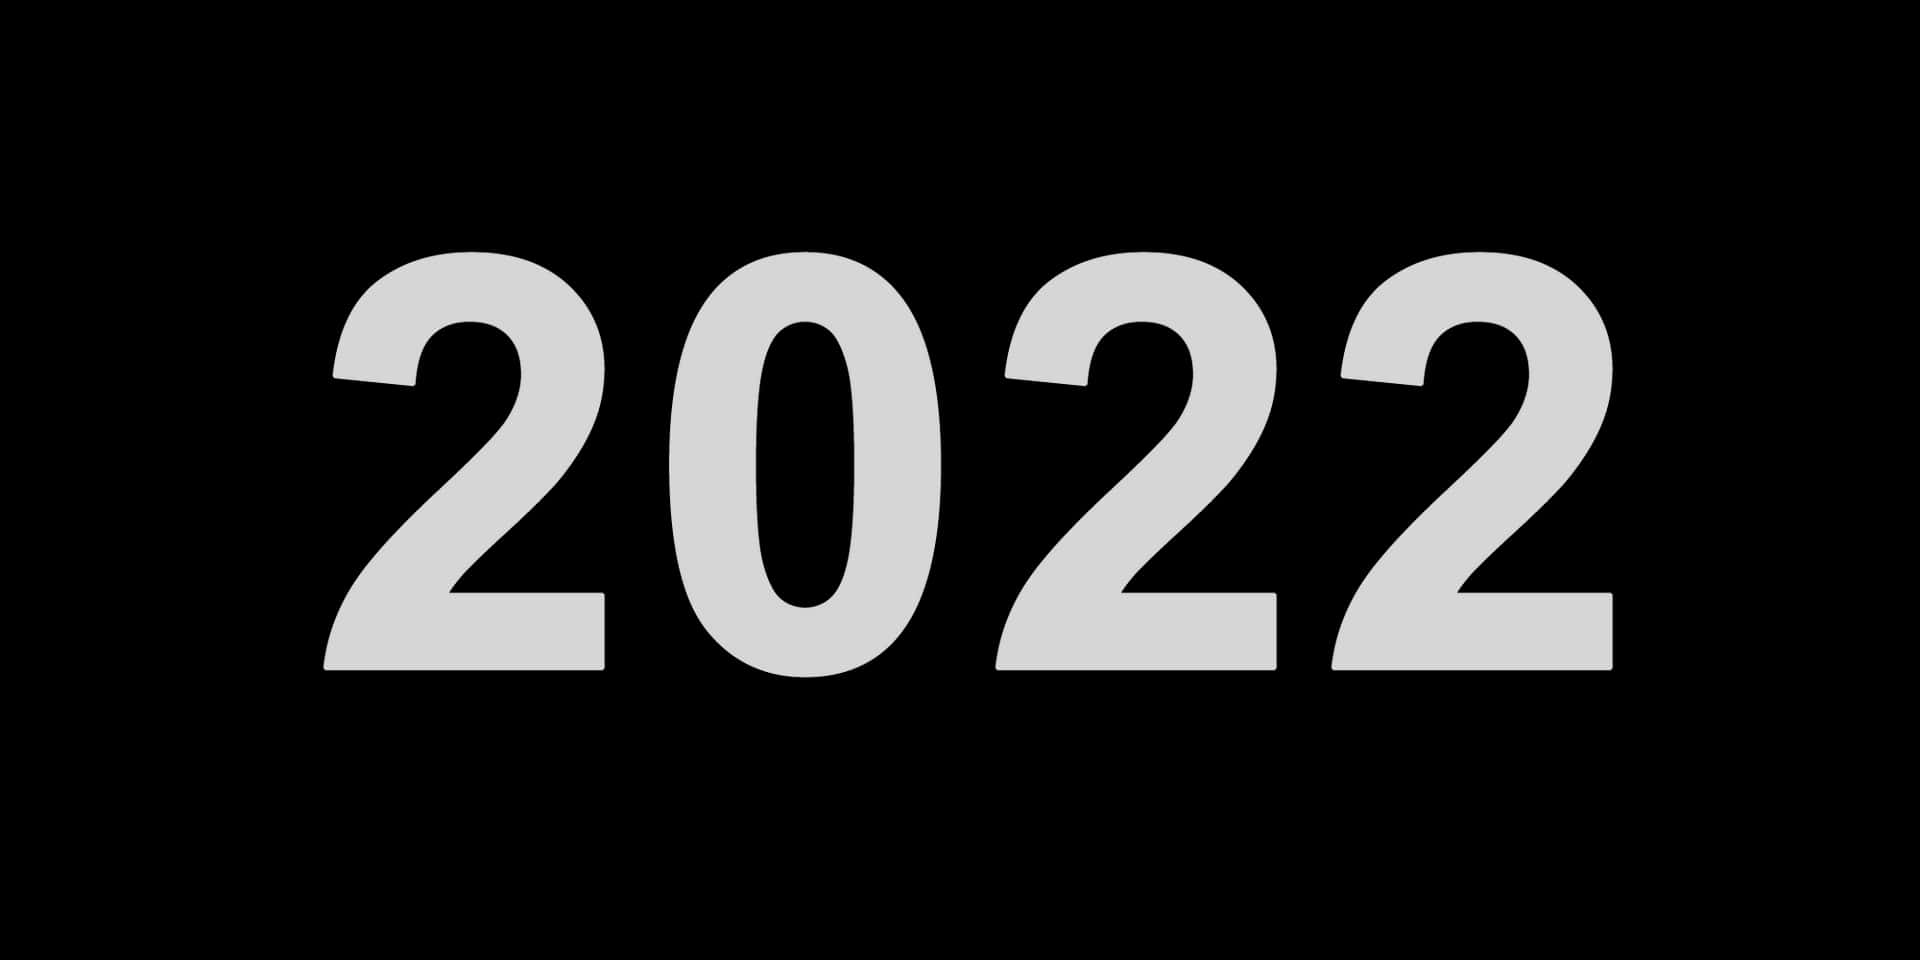 Year2022 Simple Black Background PNG image